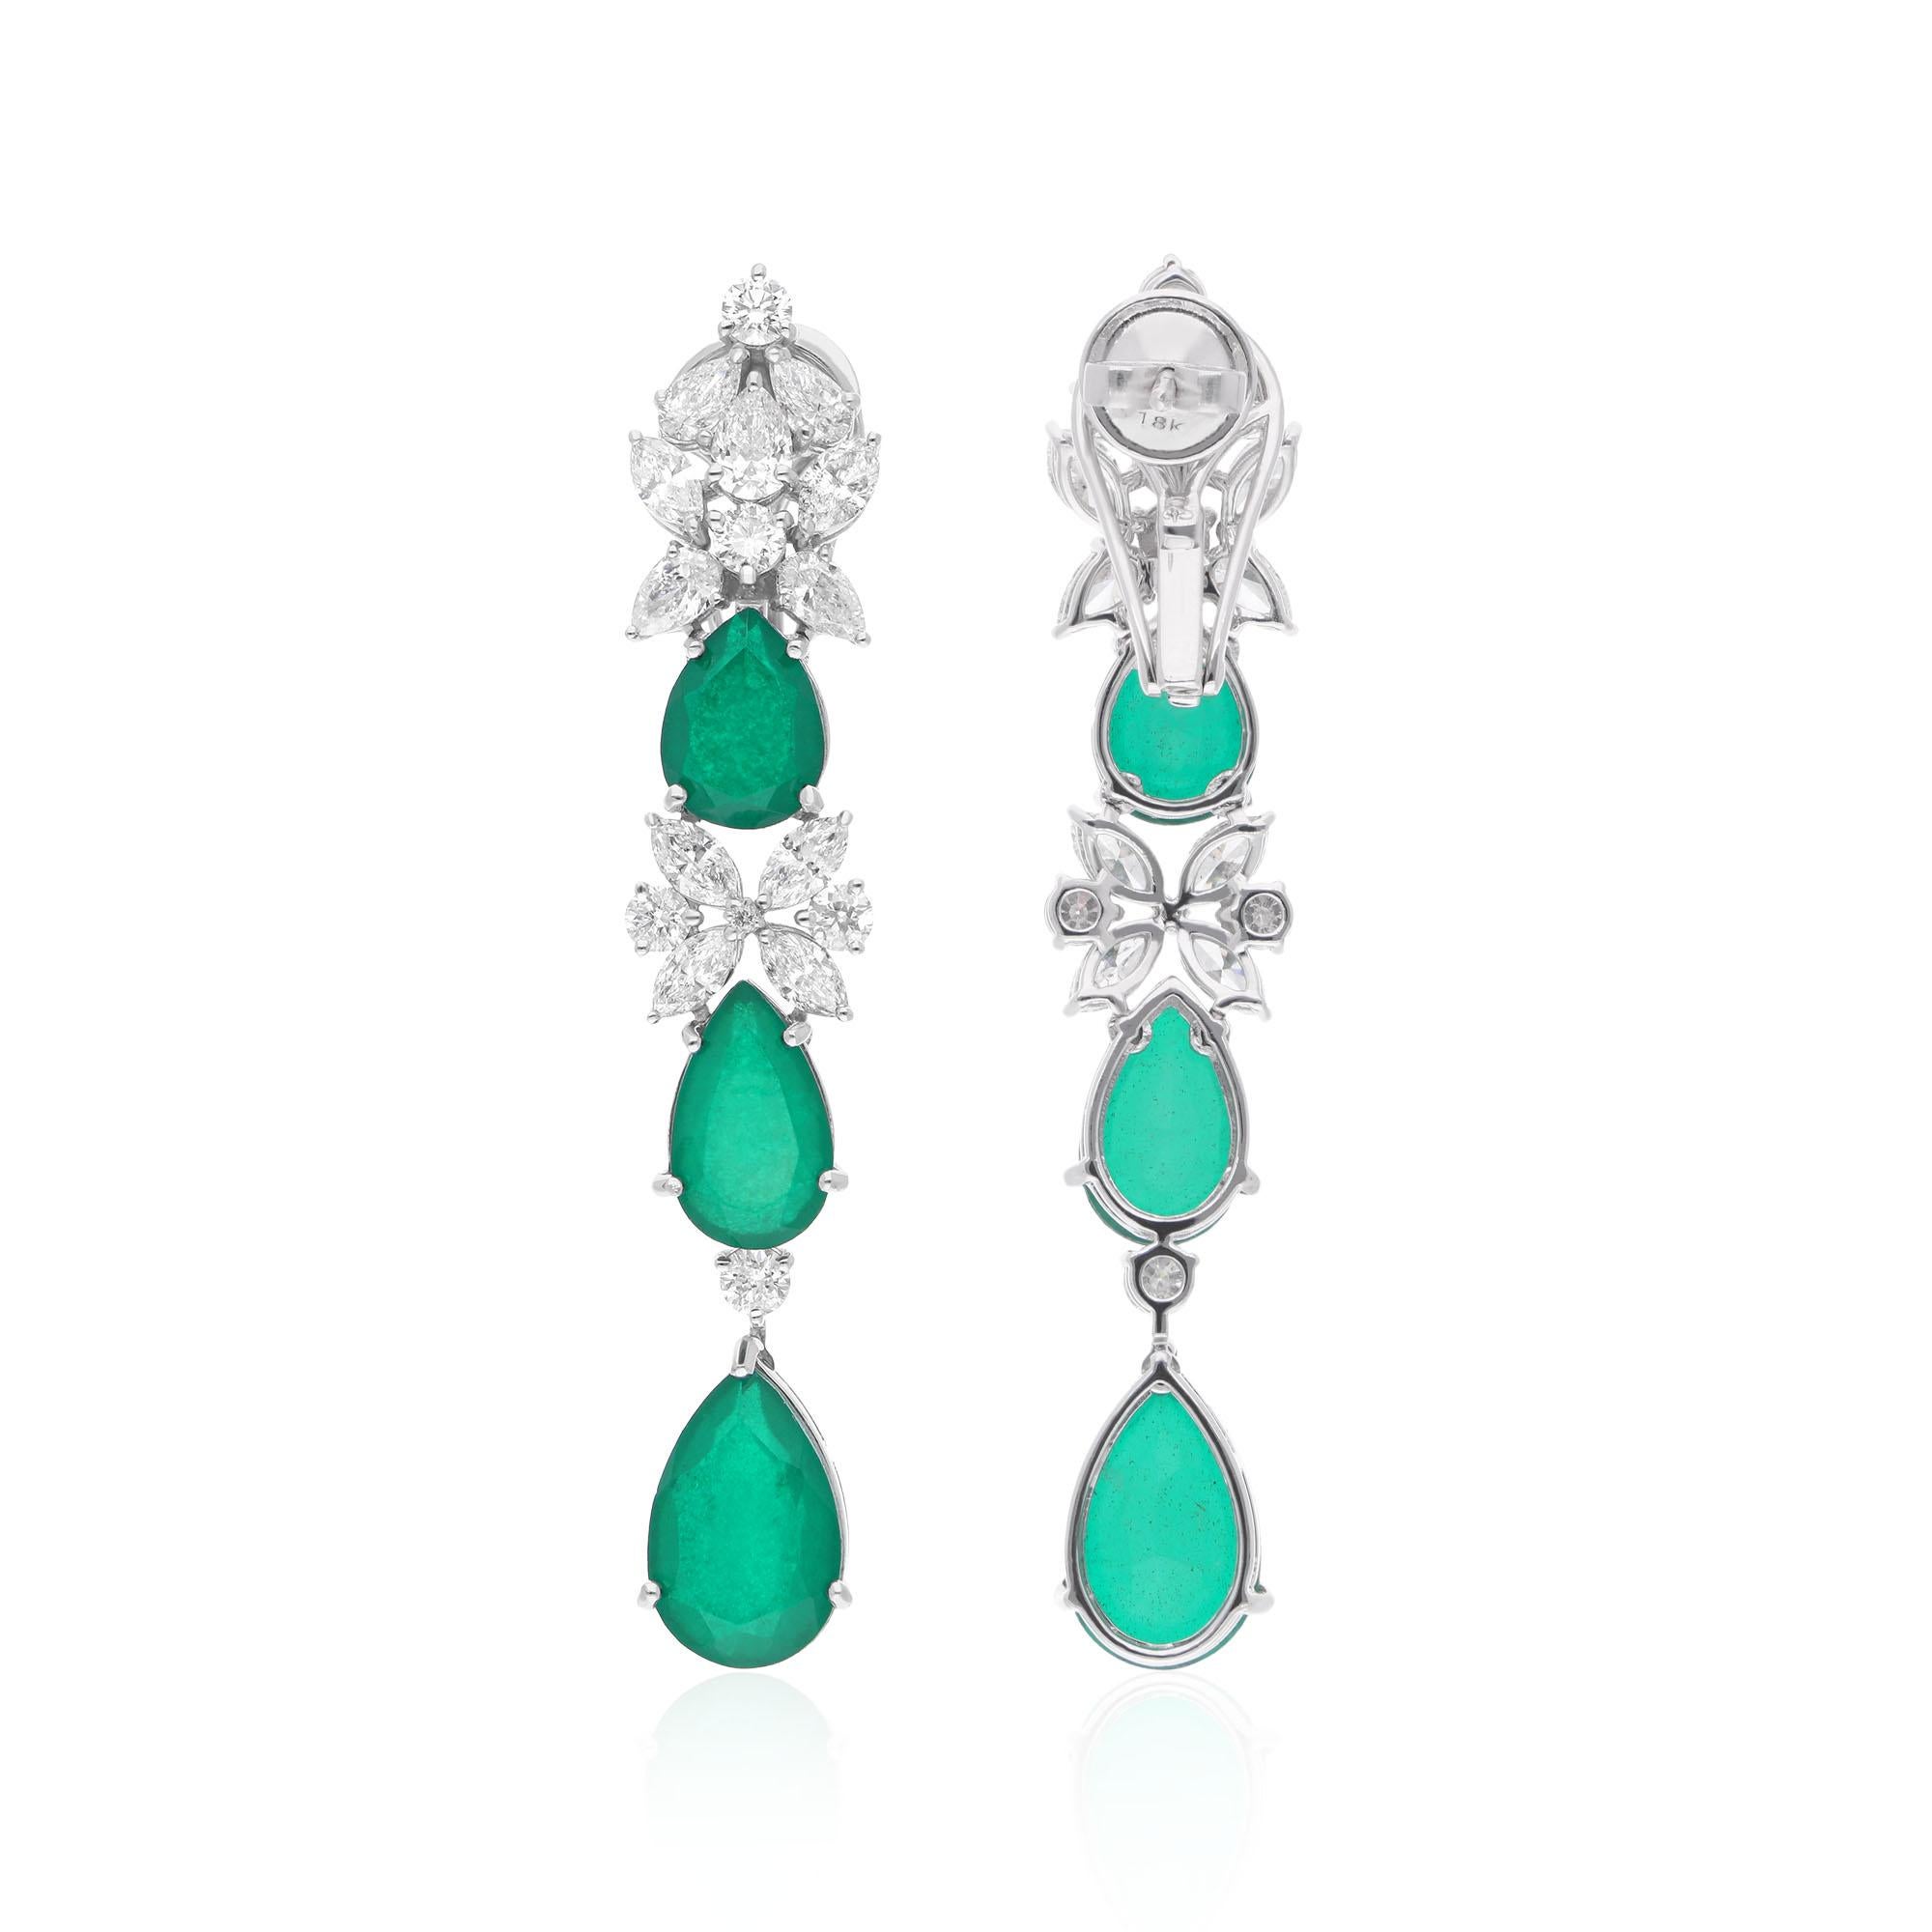 The intricate design of these earrings exudes timeless elegance, with the delicate dangle style adding a touch of femininity and grace. Whether worn for a formal event or to elevate your everyday look, these earrings are sure to make a statement of